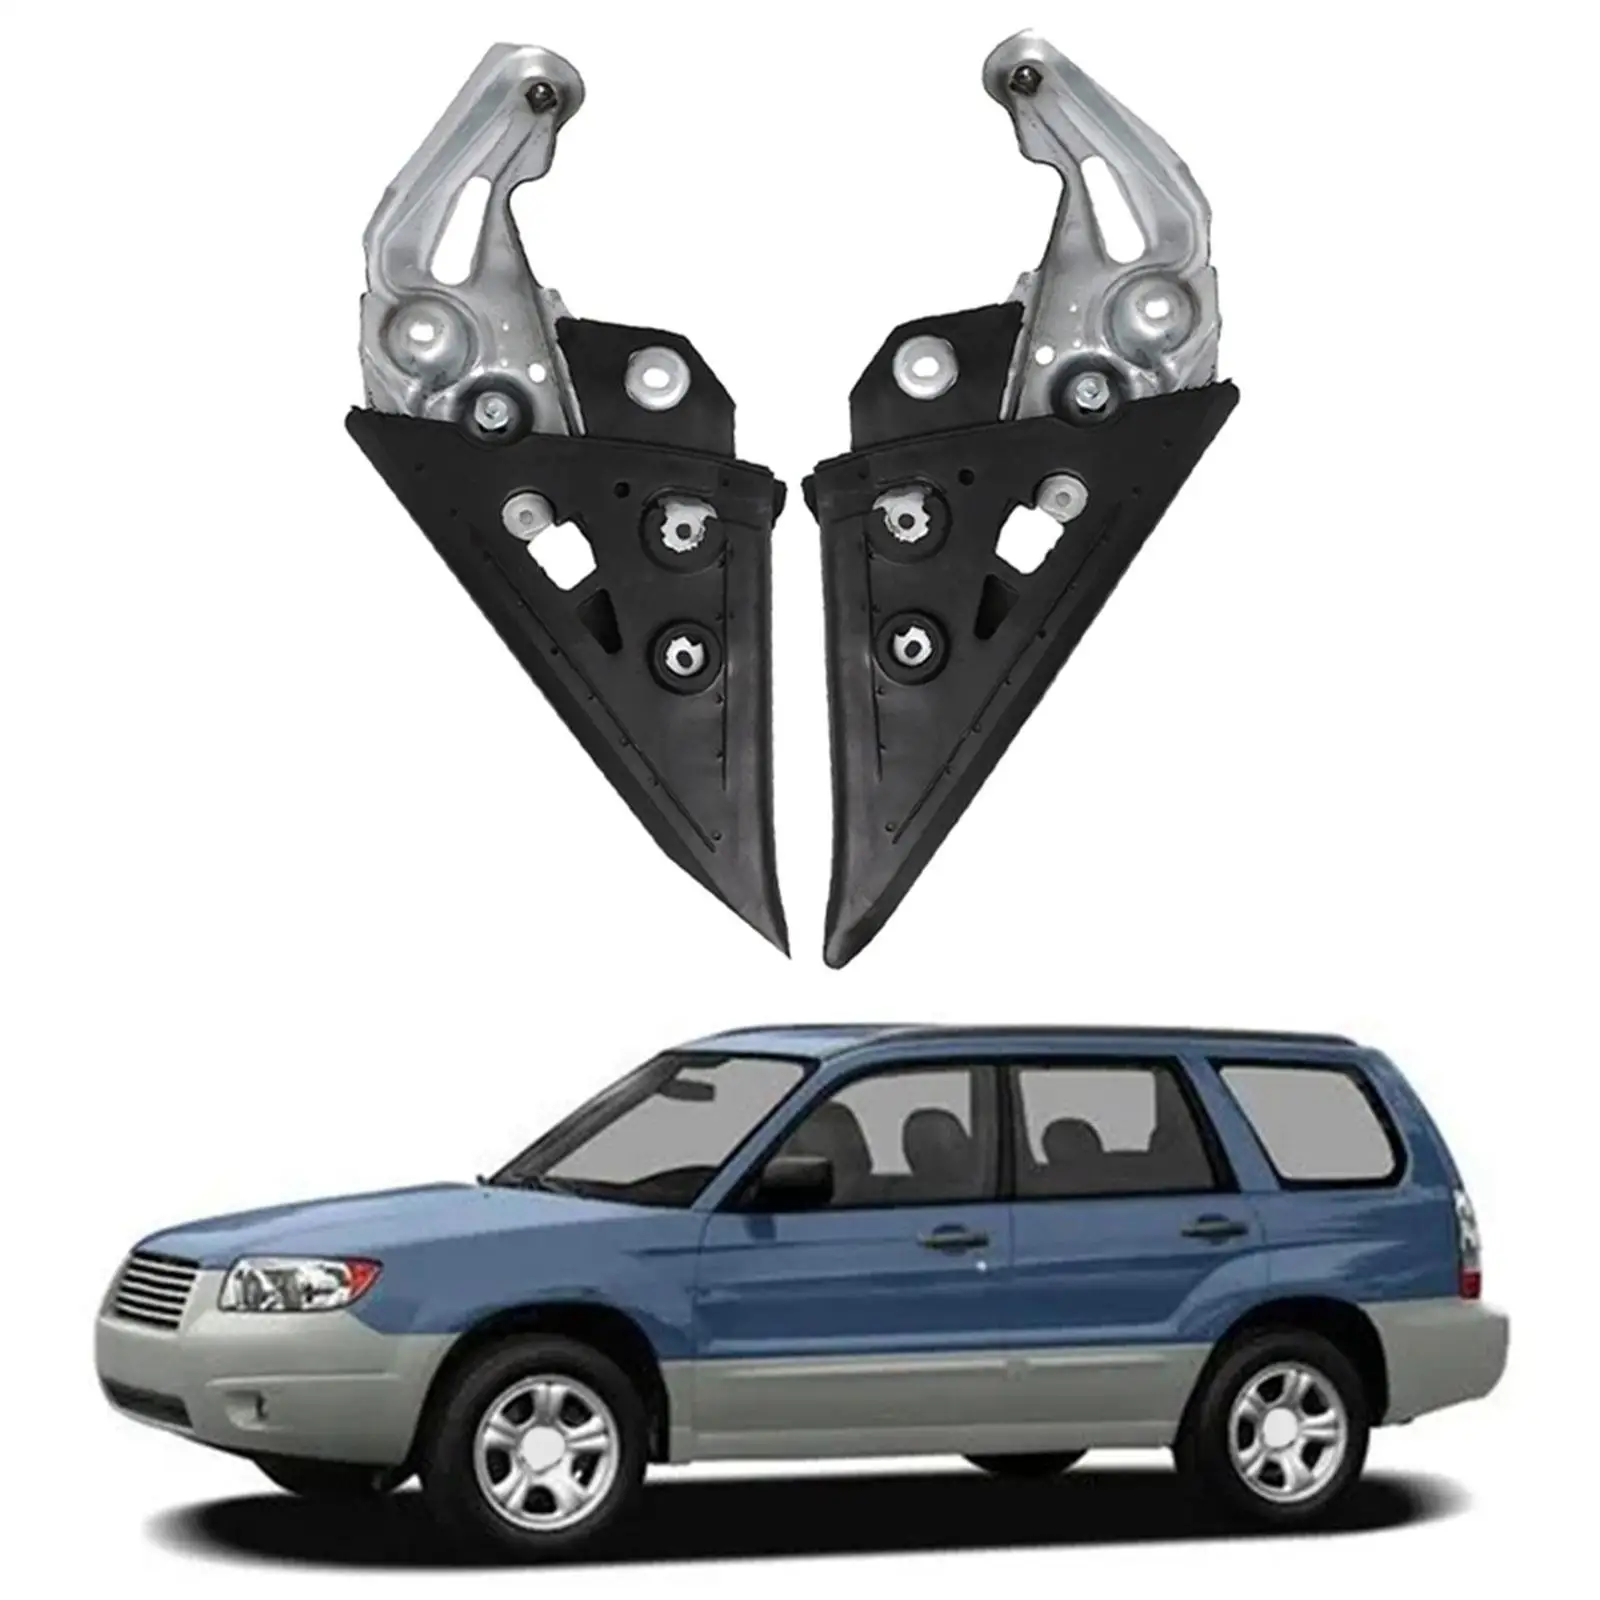 Door Gusset Assembly Set 2Pcs for Forester 2003-2008 Replacement